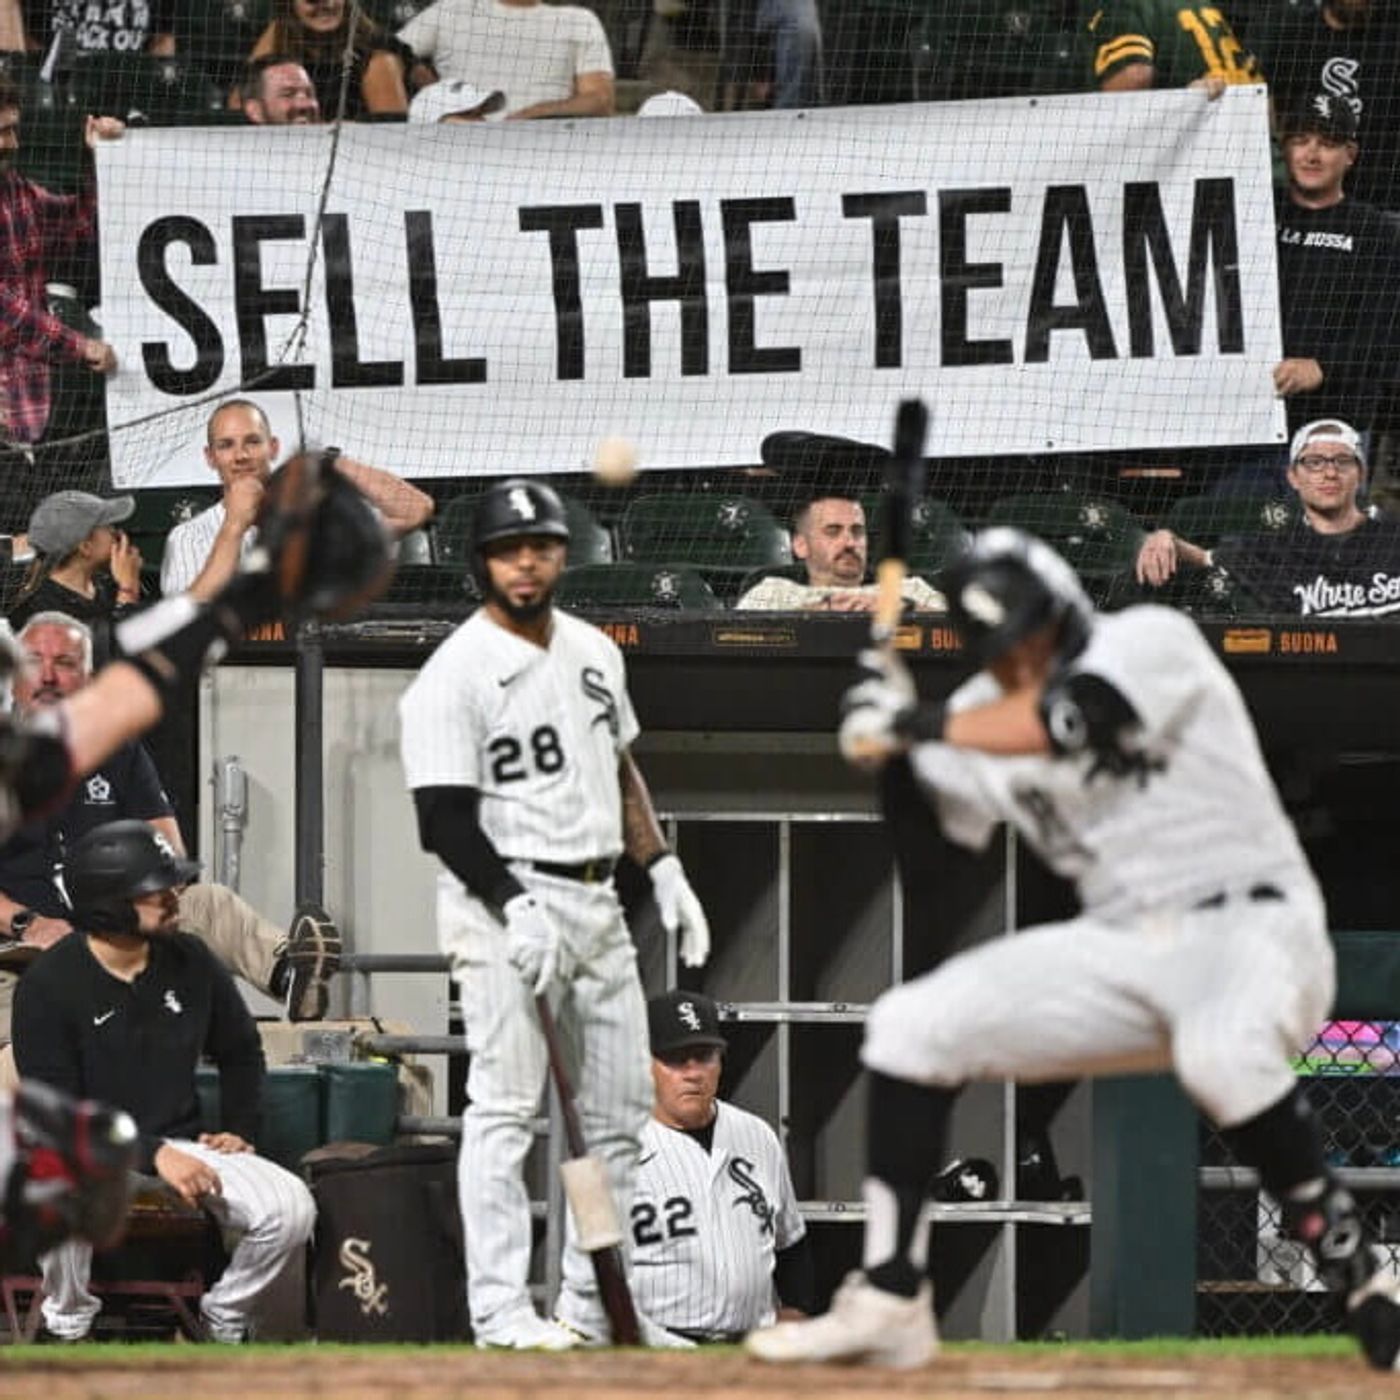 Are the White Sox cursed? Image